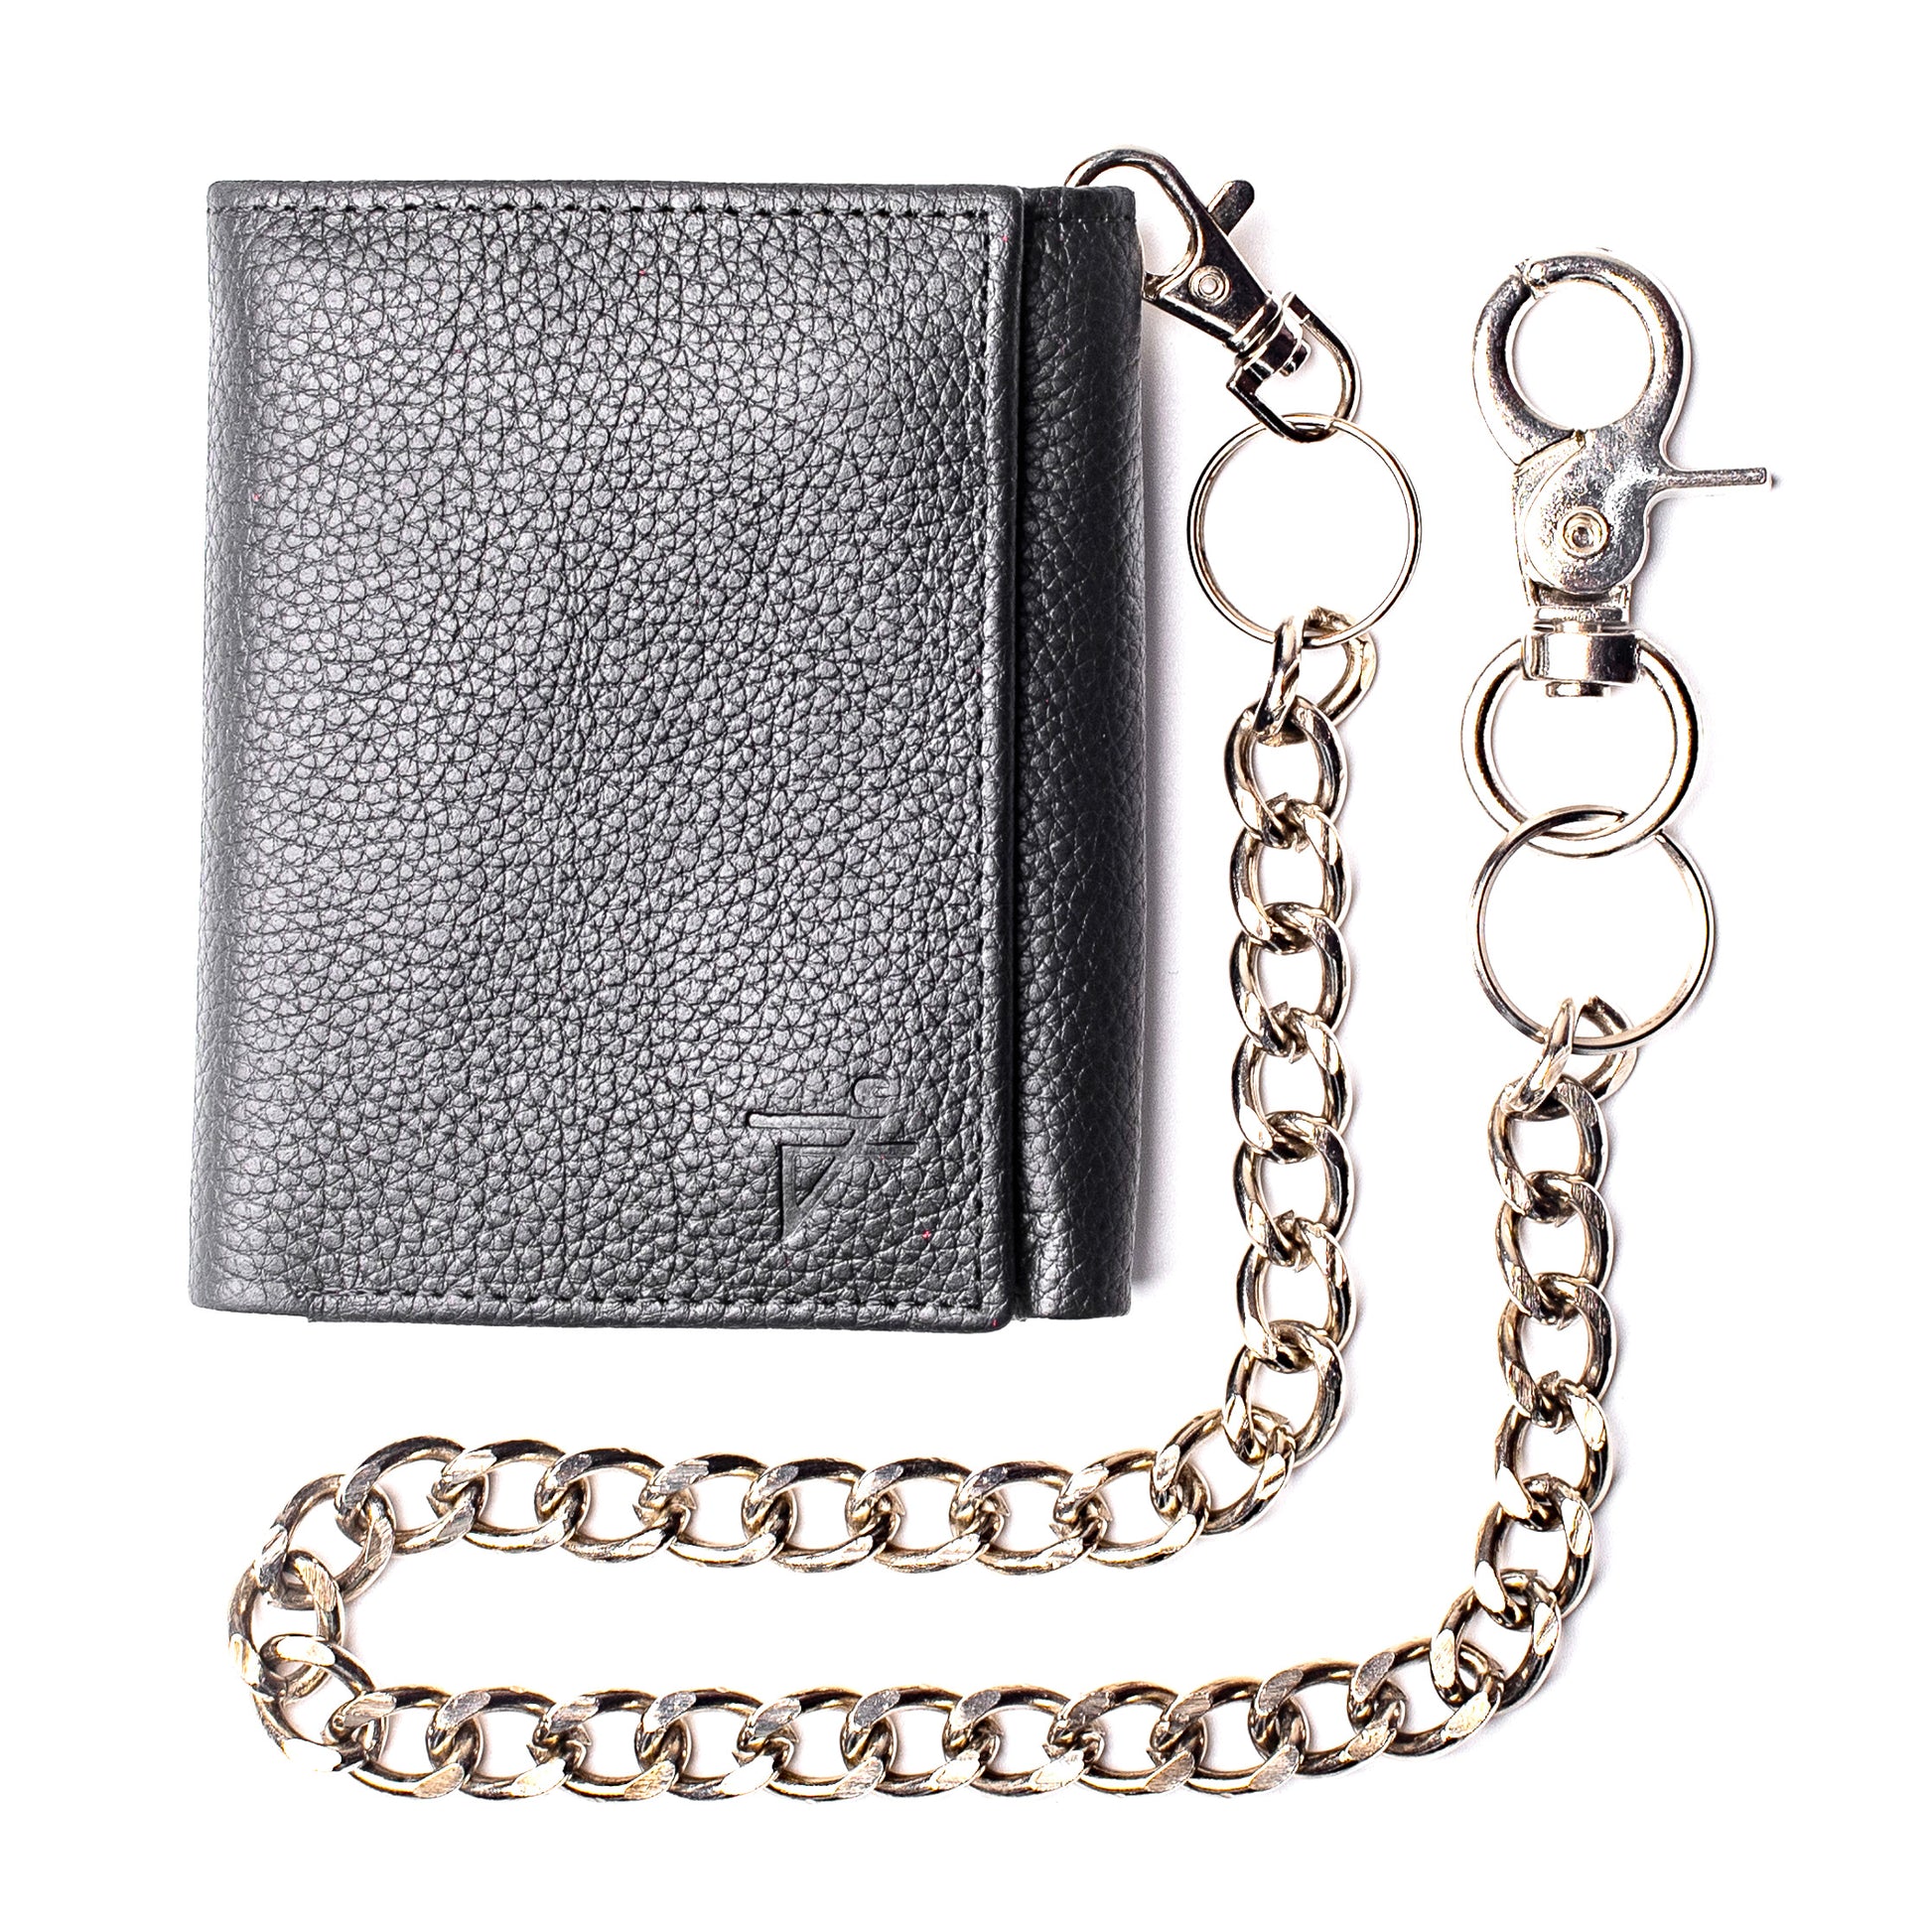 RFID Safe Biker's Leather Bifold Chain Wallet With Snap Closure Key Ho